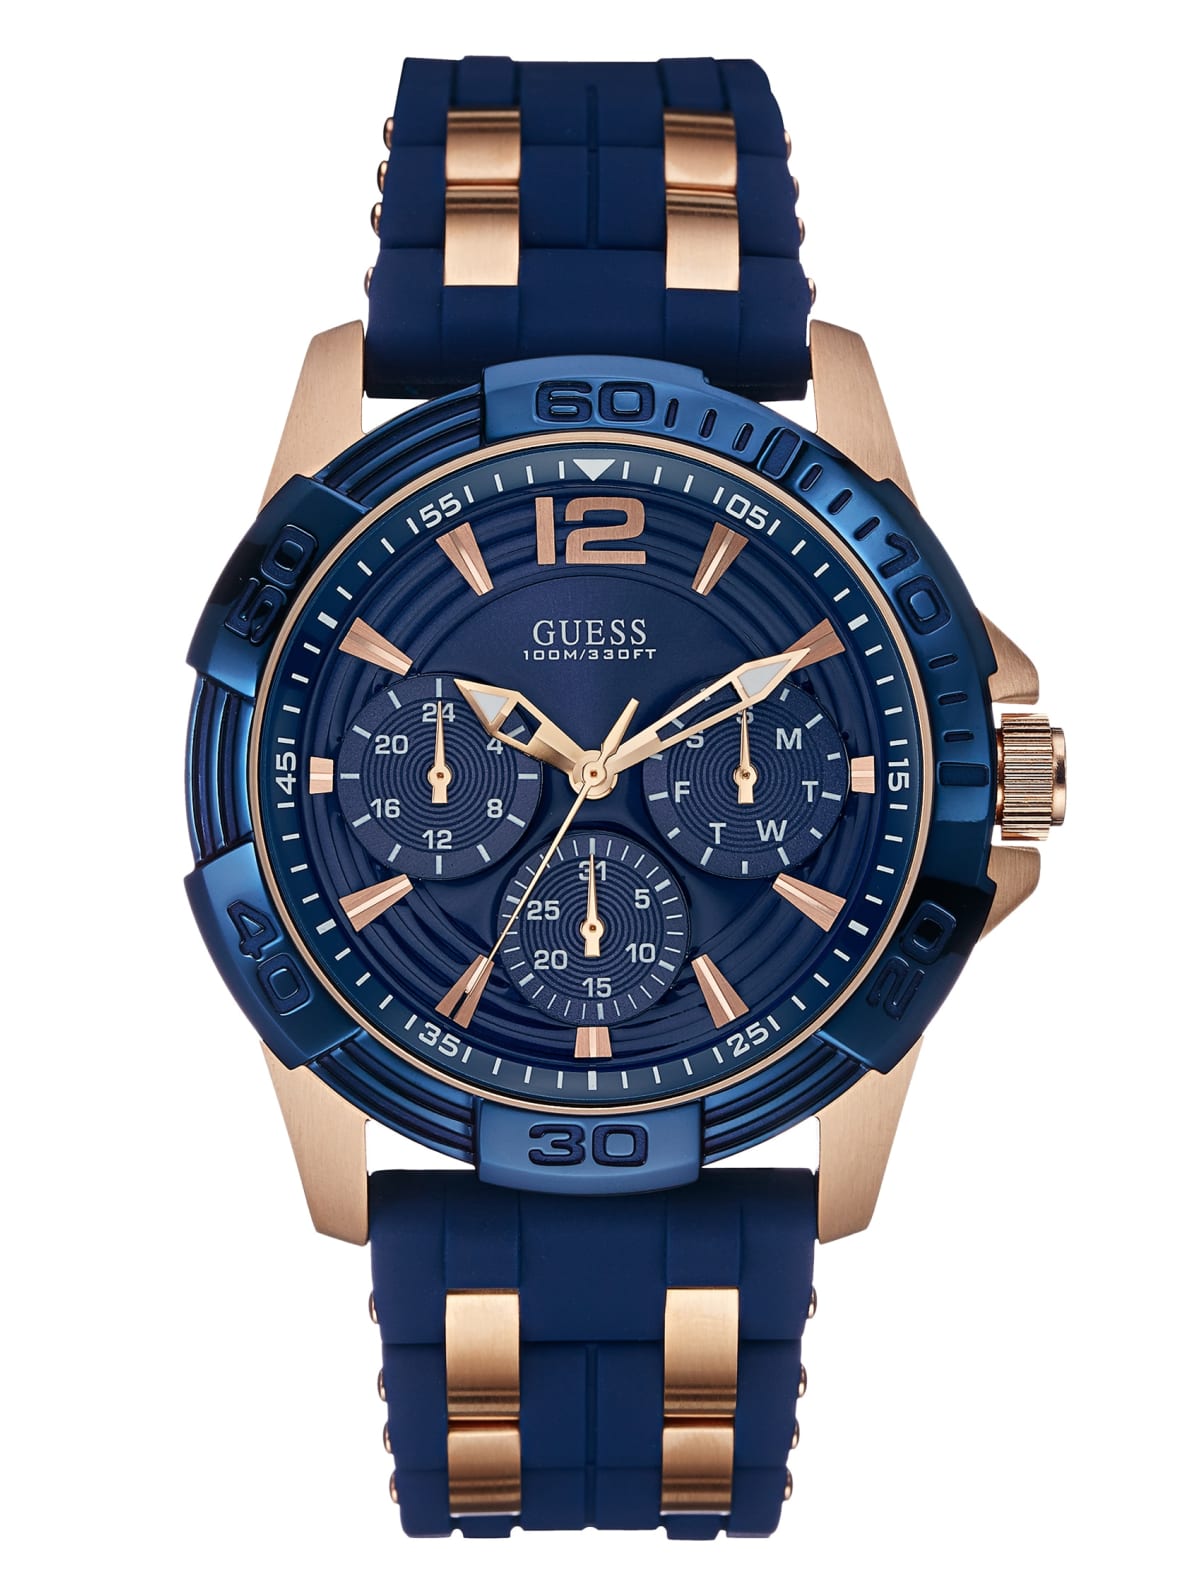 Guess Men's Blue and Rose Gold-Tone Sport Watch